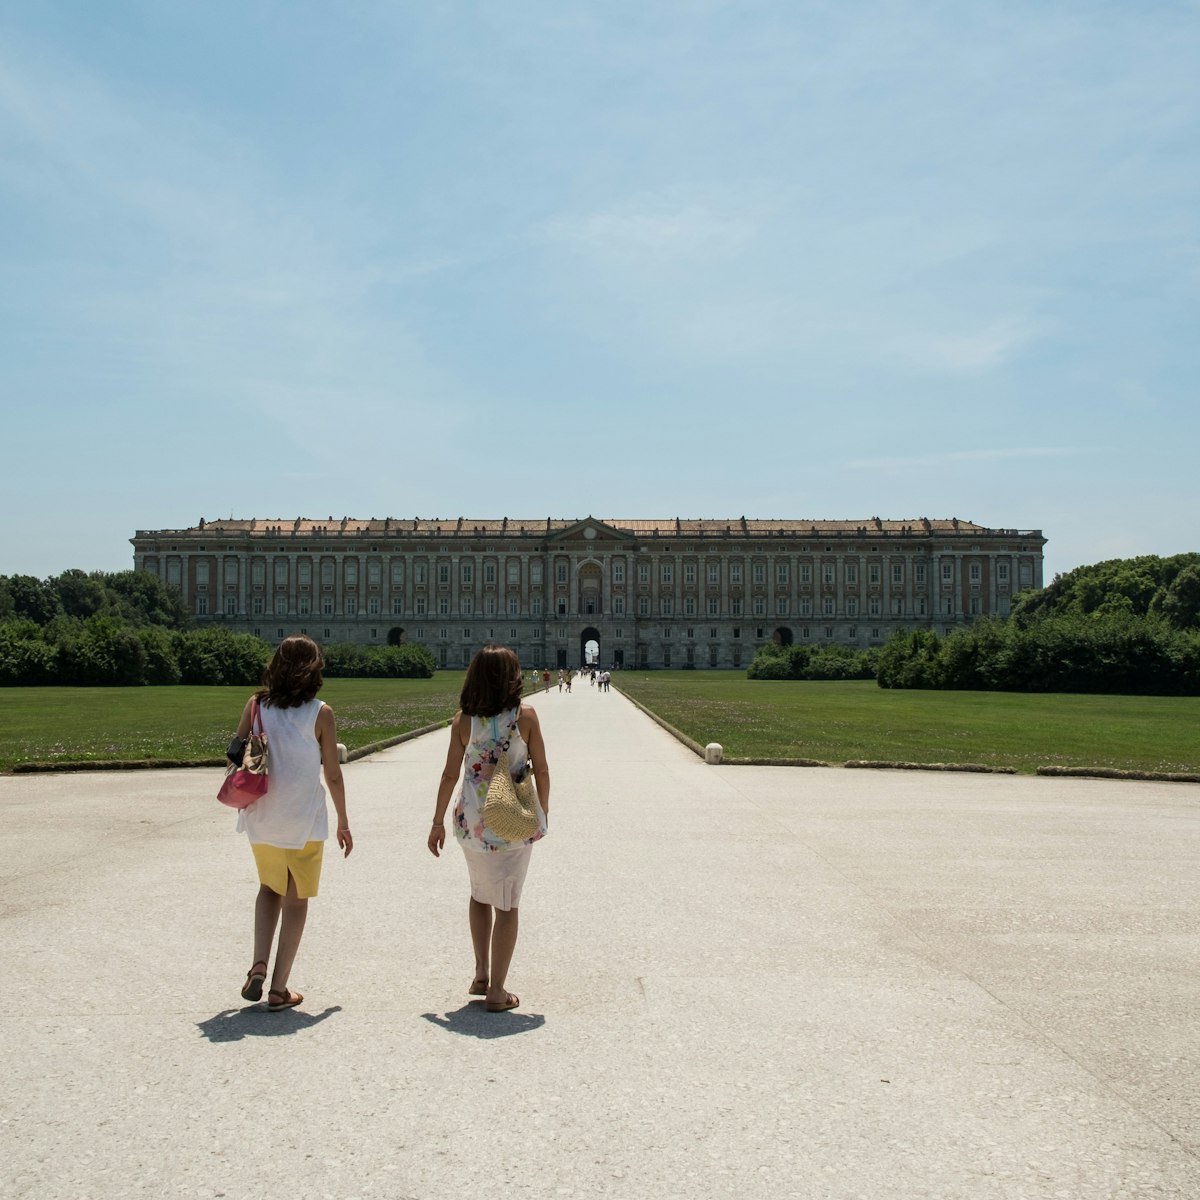 Entrance to Caserta Palace from the royal park